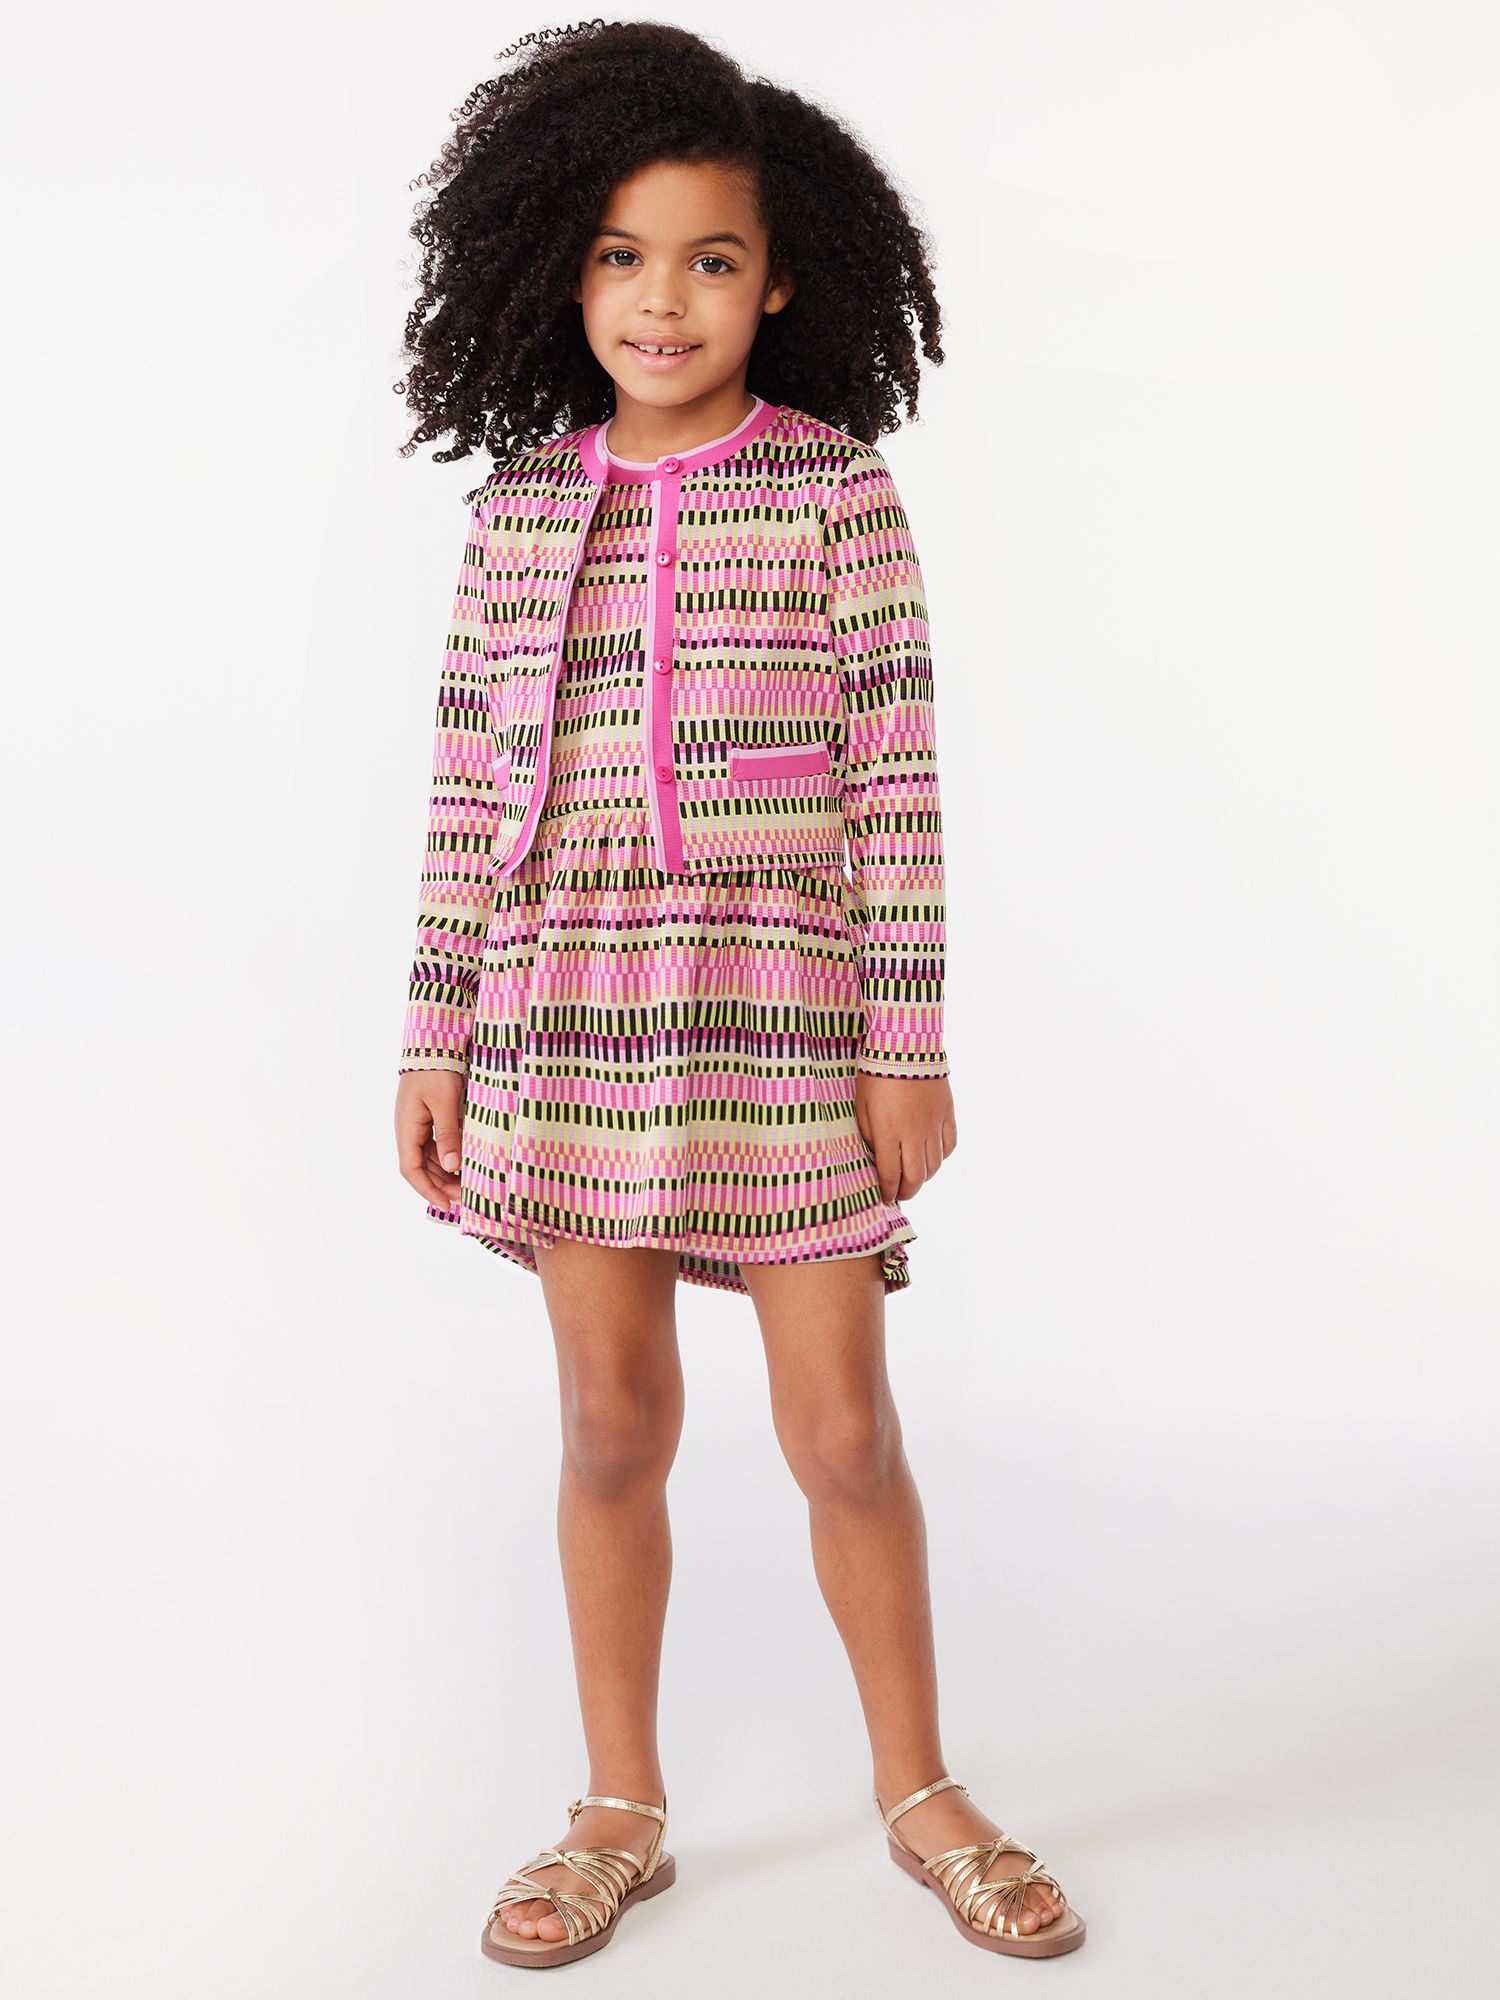 Scoop Girls Short Sleeve Fit and Flare Dress, Sizes 4-12 | Walmart (US)